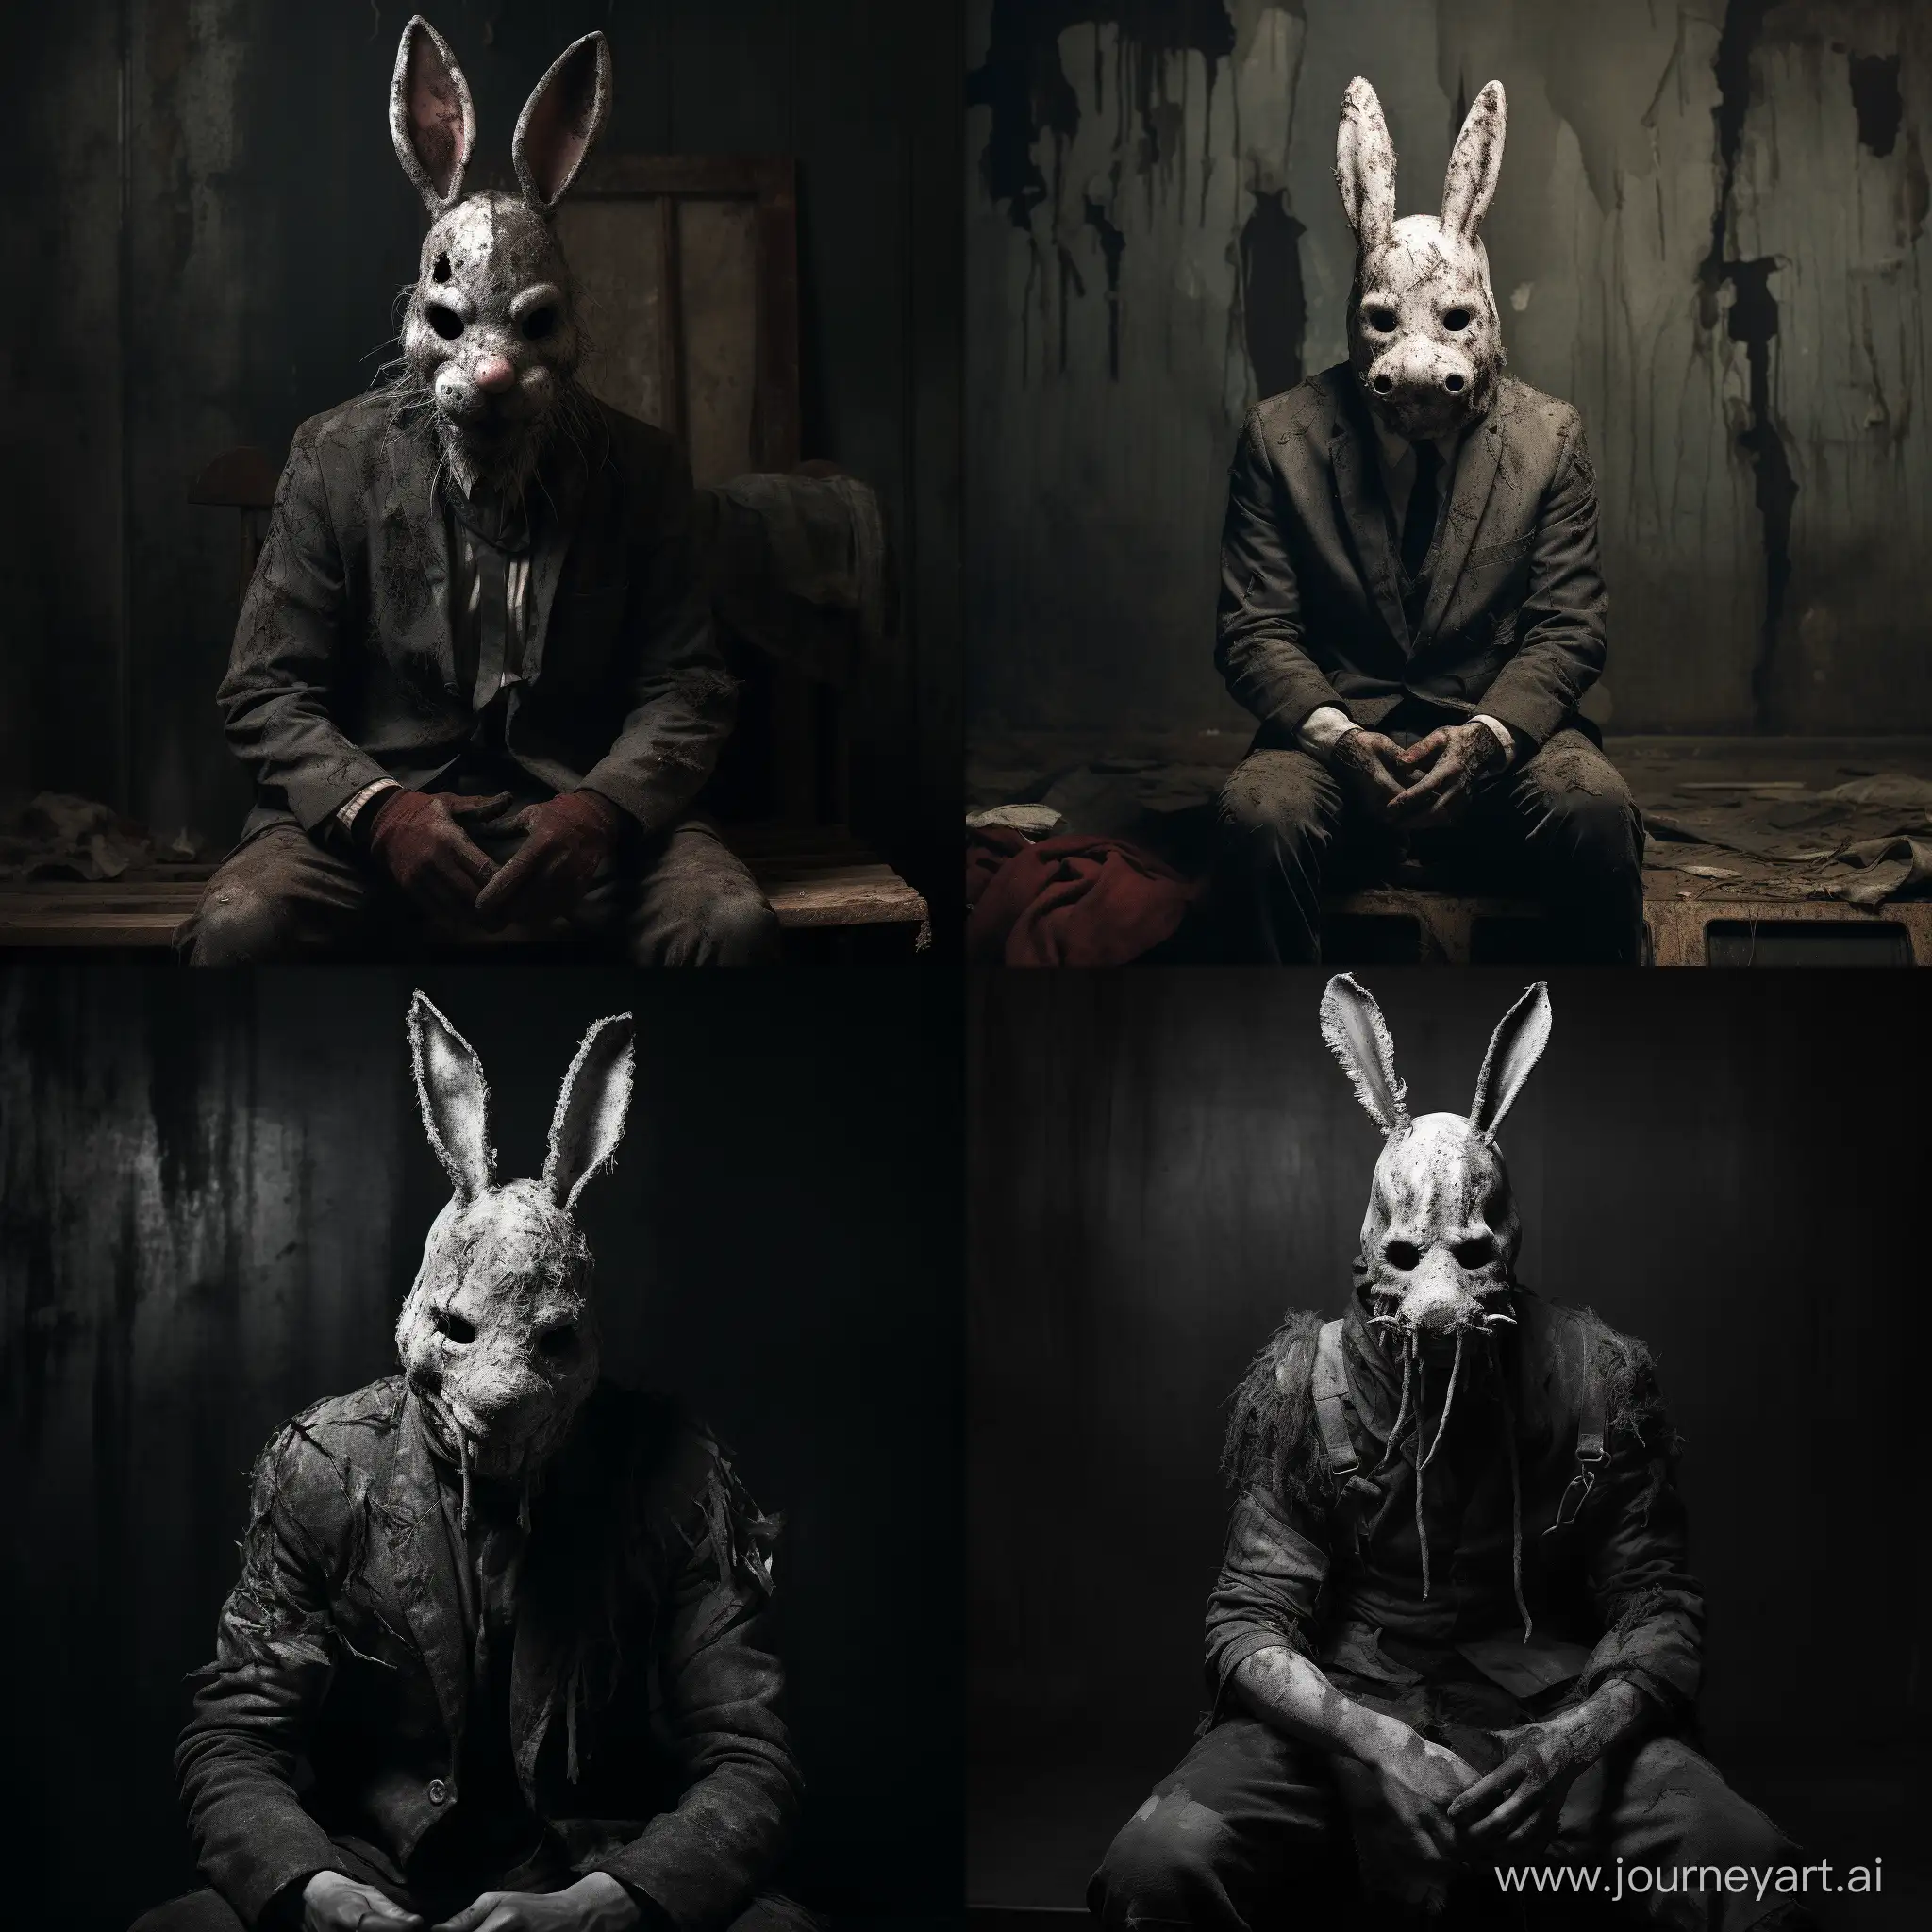 Eerie-Rabbit-Masked-Figure-in-Distressed-Setting-Surreal-Portrait-Photography